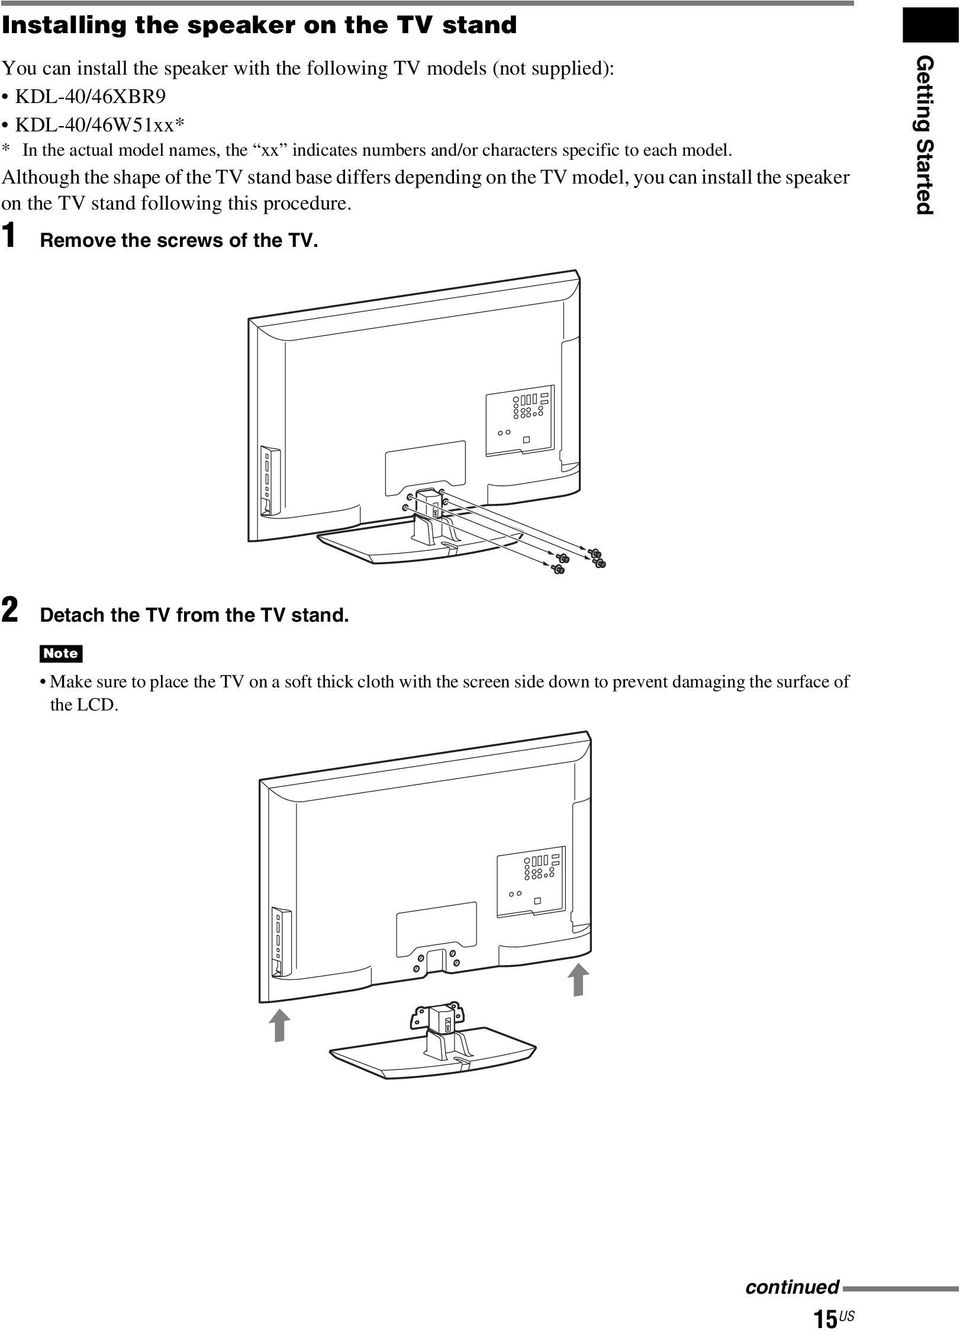 Although the shape of the TV stand base differs depending on the TV model, you can install the speaker on the TV stand following this procedure.